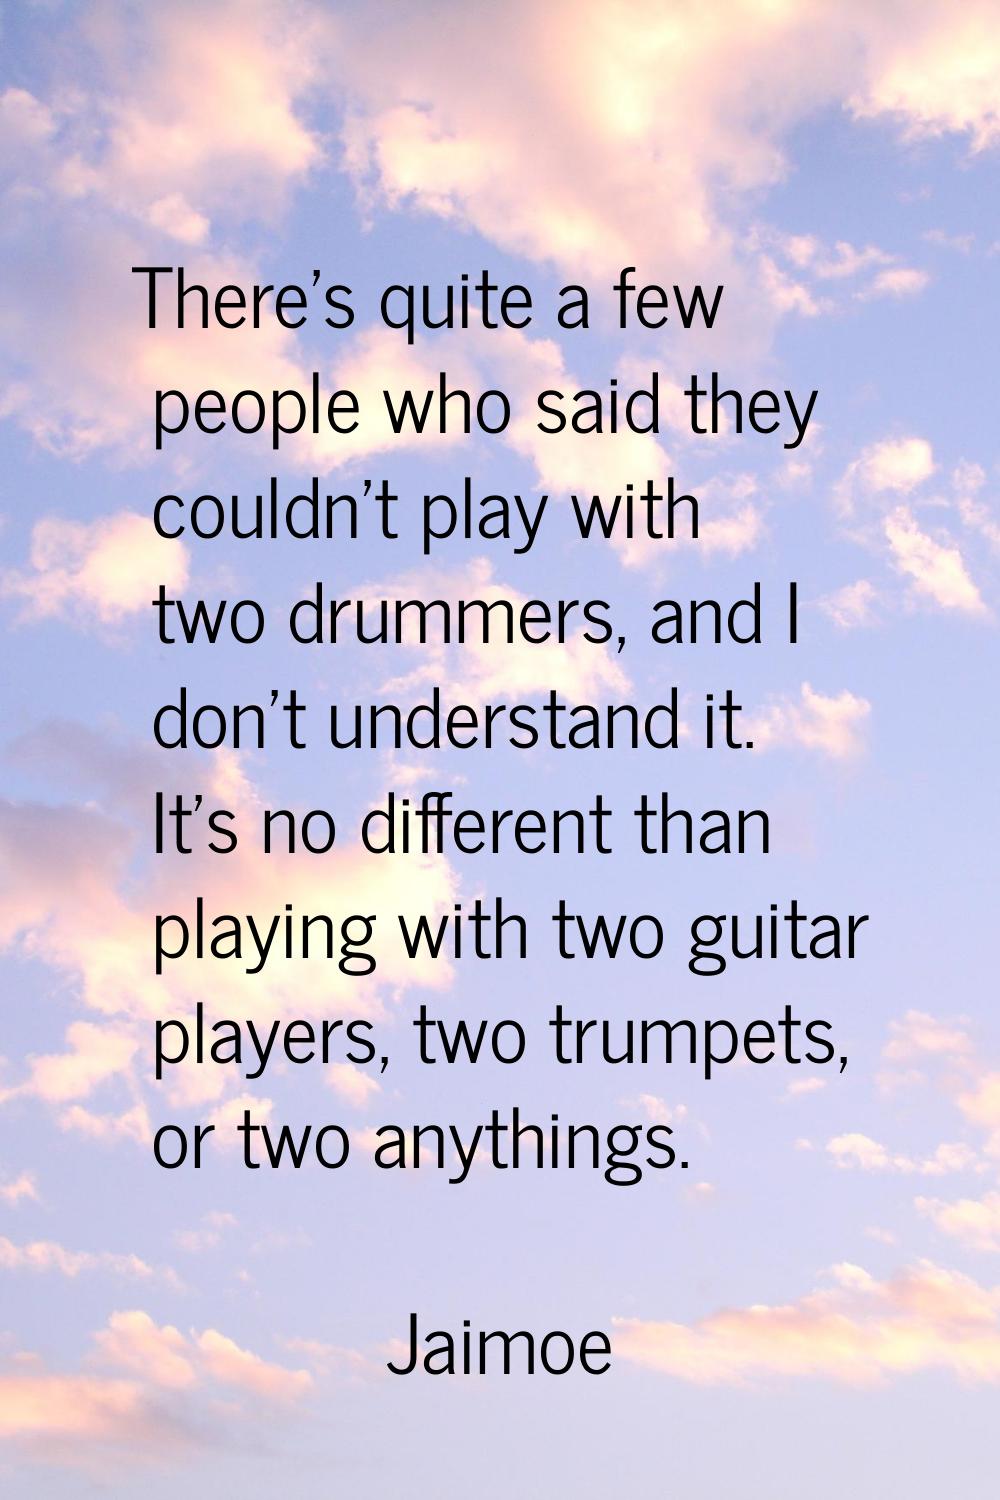 There's quite a few people who said they couldn't play with two drummers, and I don't understand it